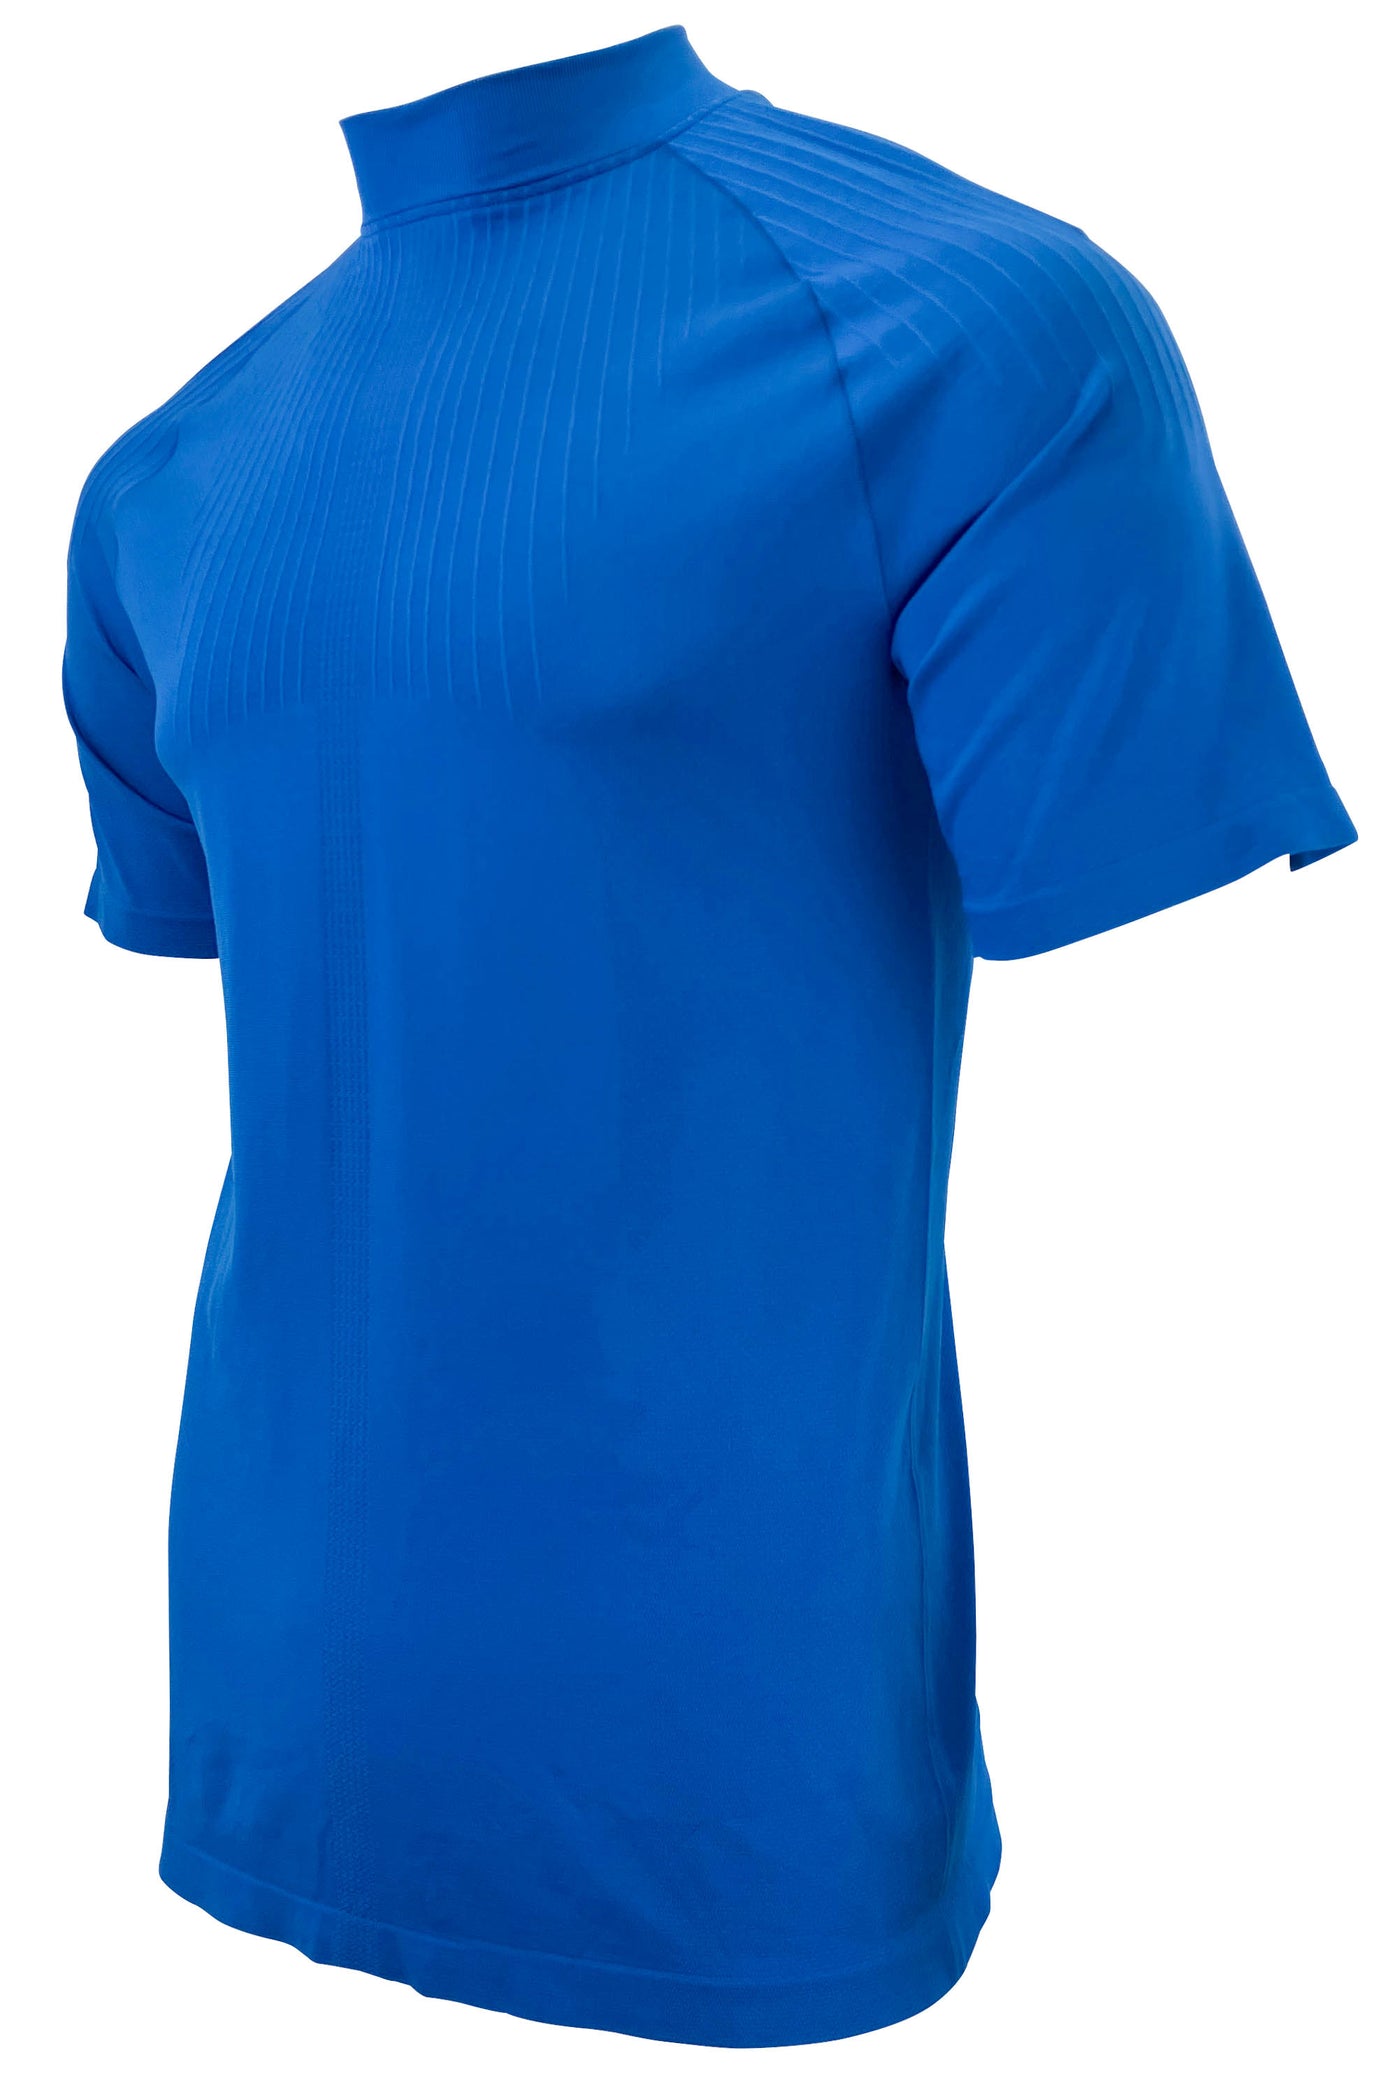 Nike x MMW Crossover Dri-Fit Top in Blue Jay - Discounts on Nike at UAL